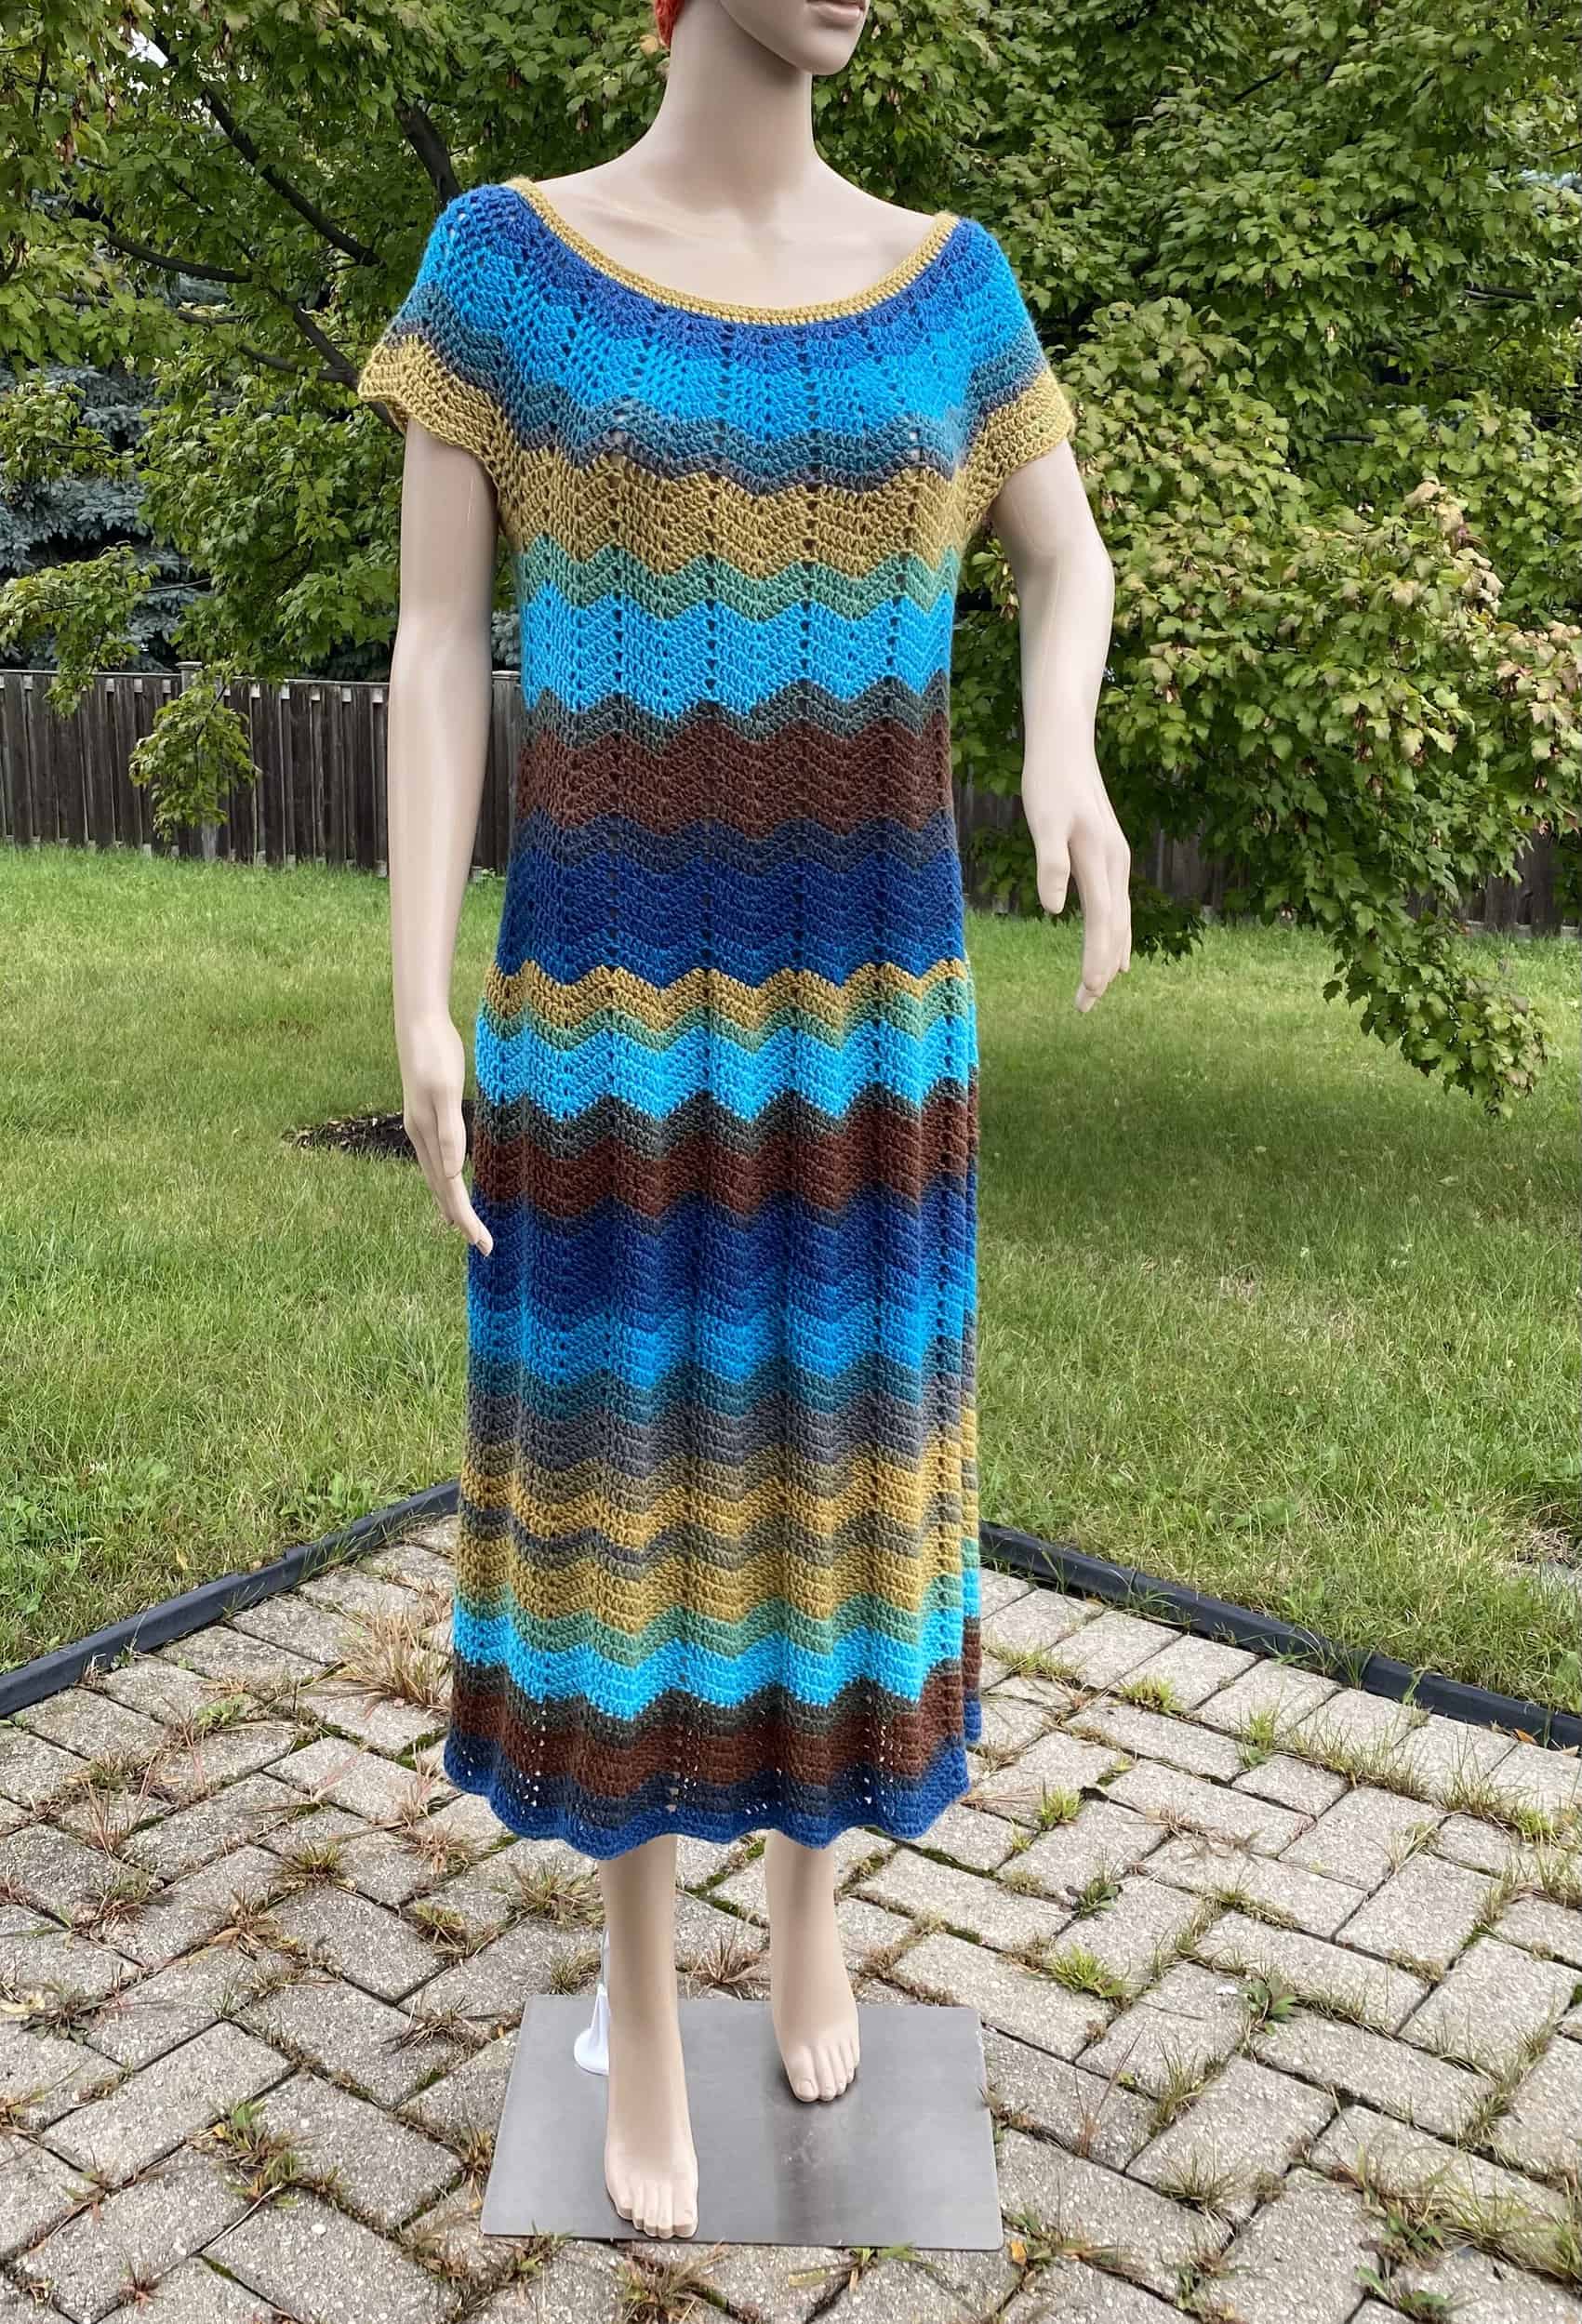 This Autumn Crochet Handmade Dress is made with love by Classy Crafty Wife! Shop more unique gift ideas today with Spots Initiatives, the best way to support creators.